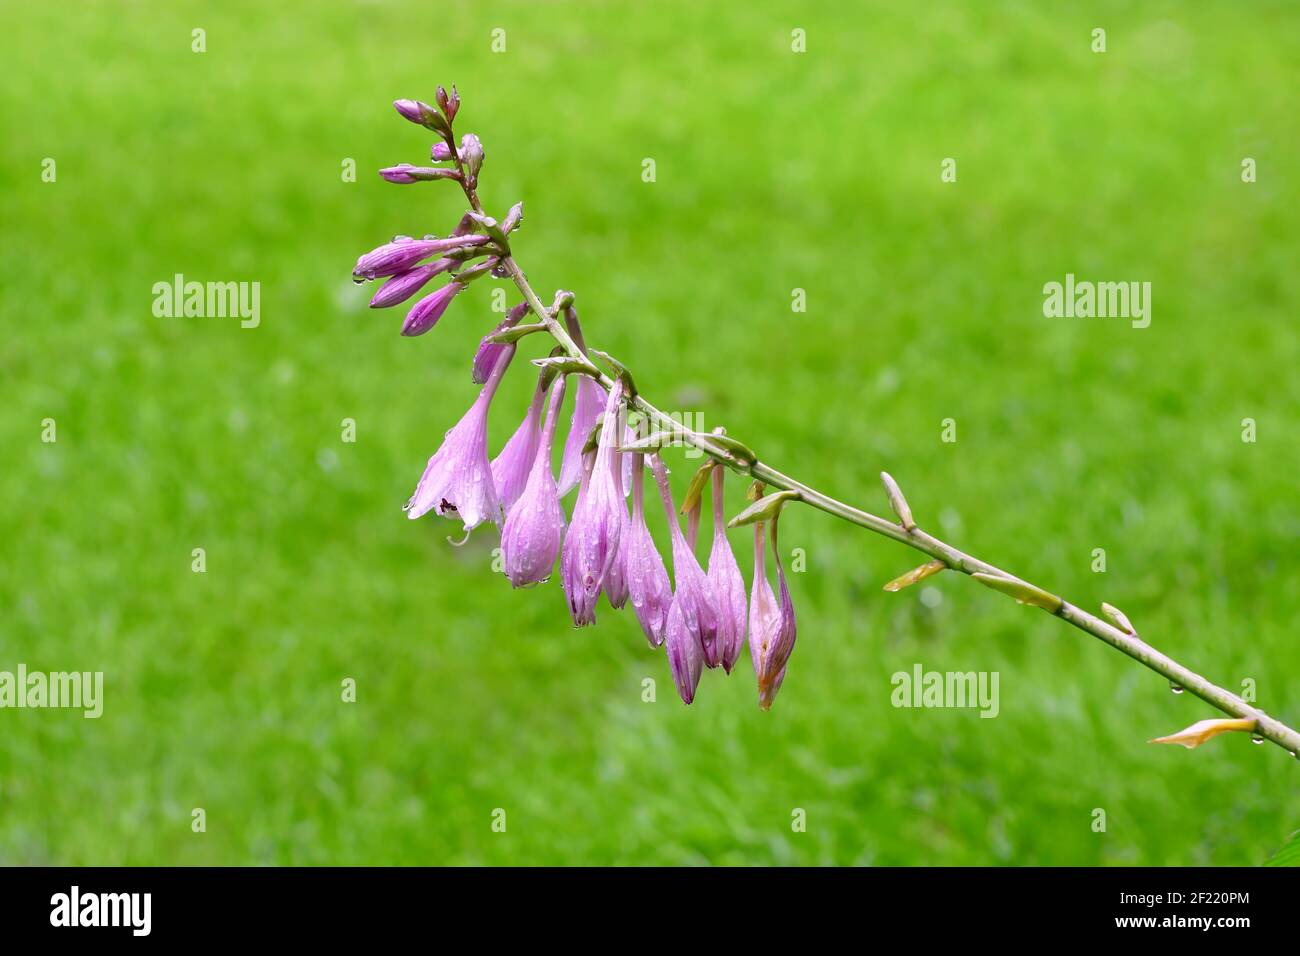 Beautiful giant wet bellflower plant flowering in summertime, Campanula with purple and violet hue elongated flowers on the green grassland blurry bac Stock Photo